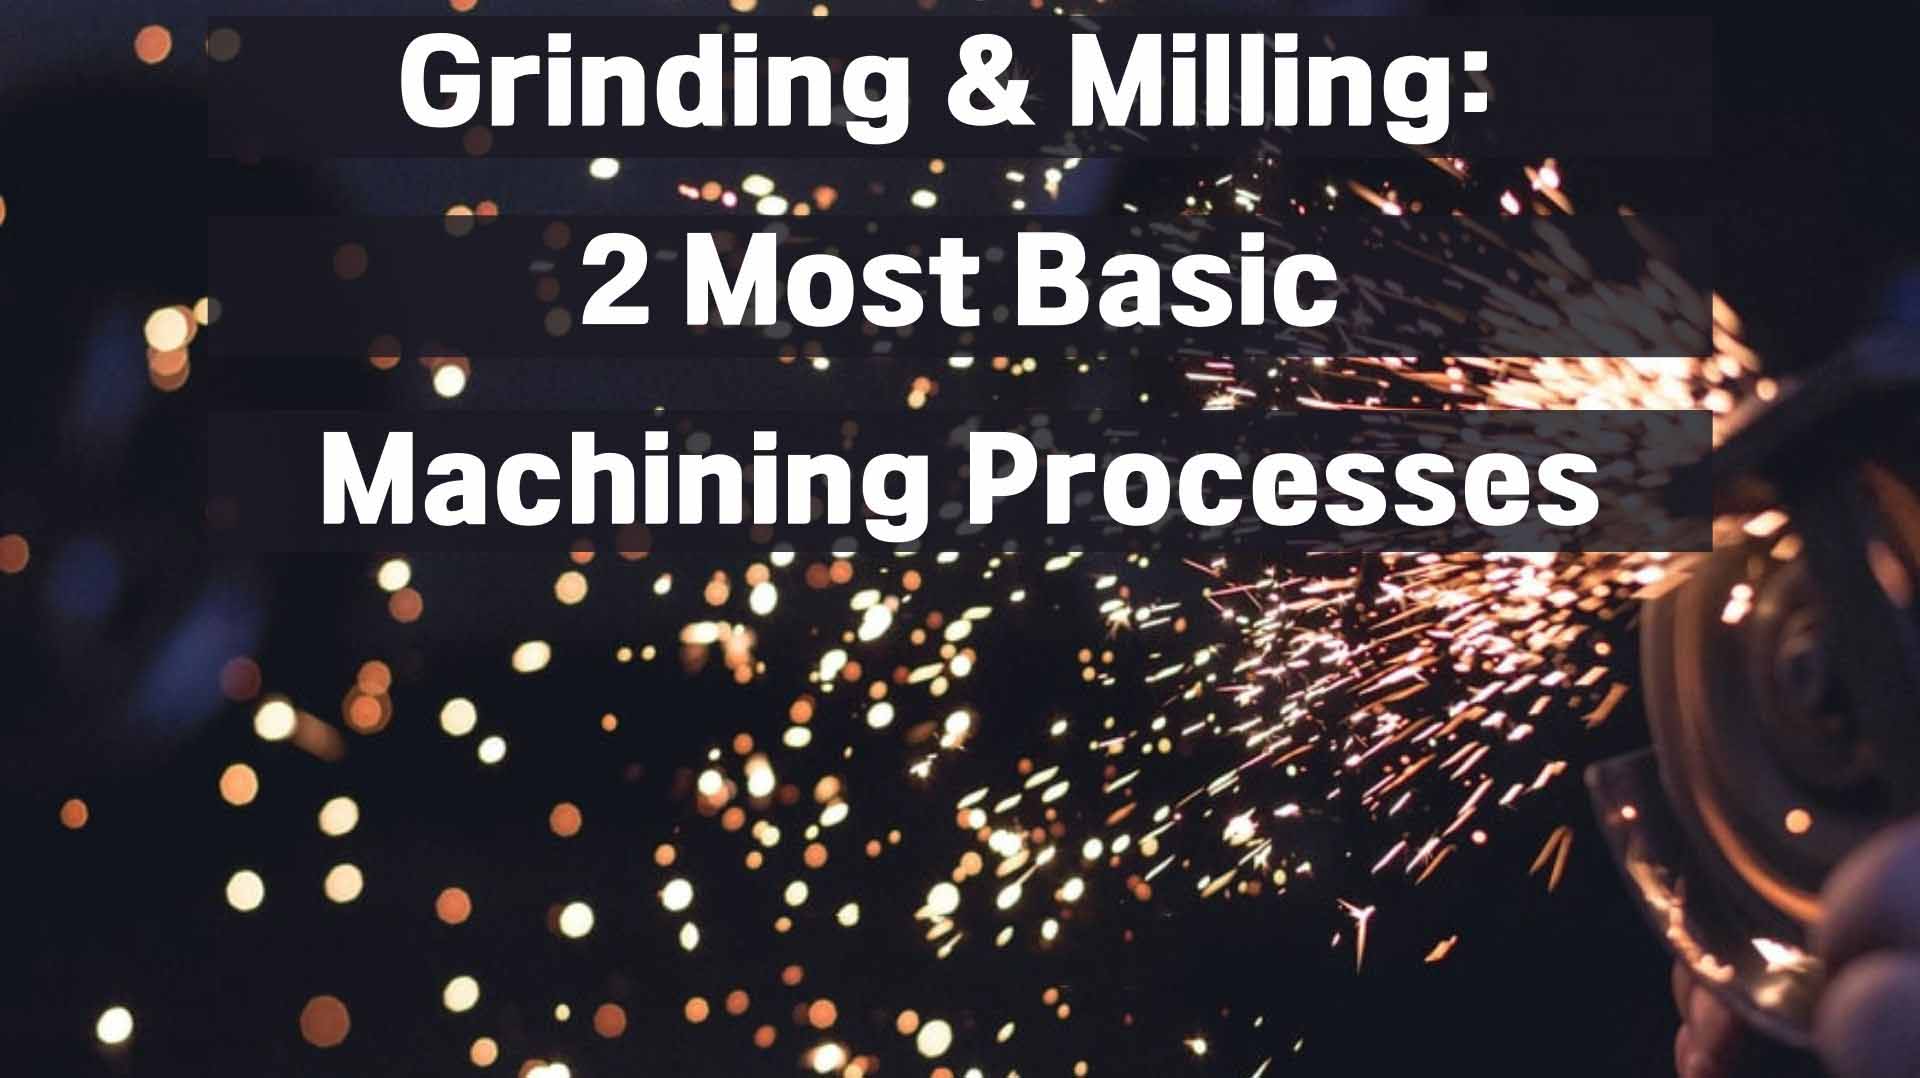 Grinding & Milling 2 Most Basic Machining Processes